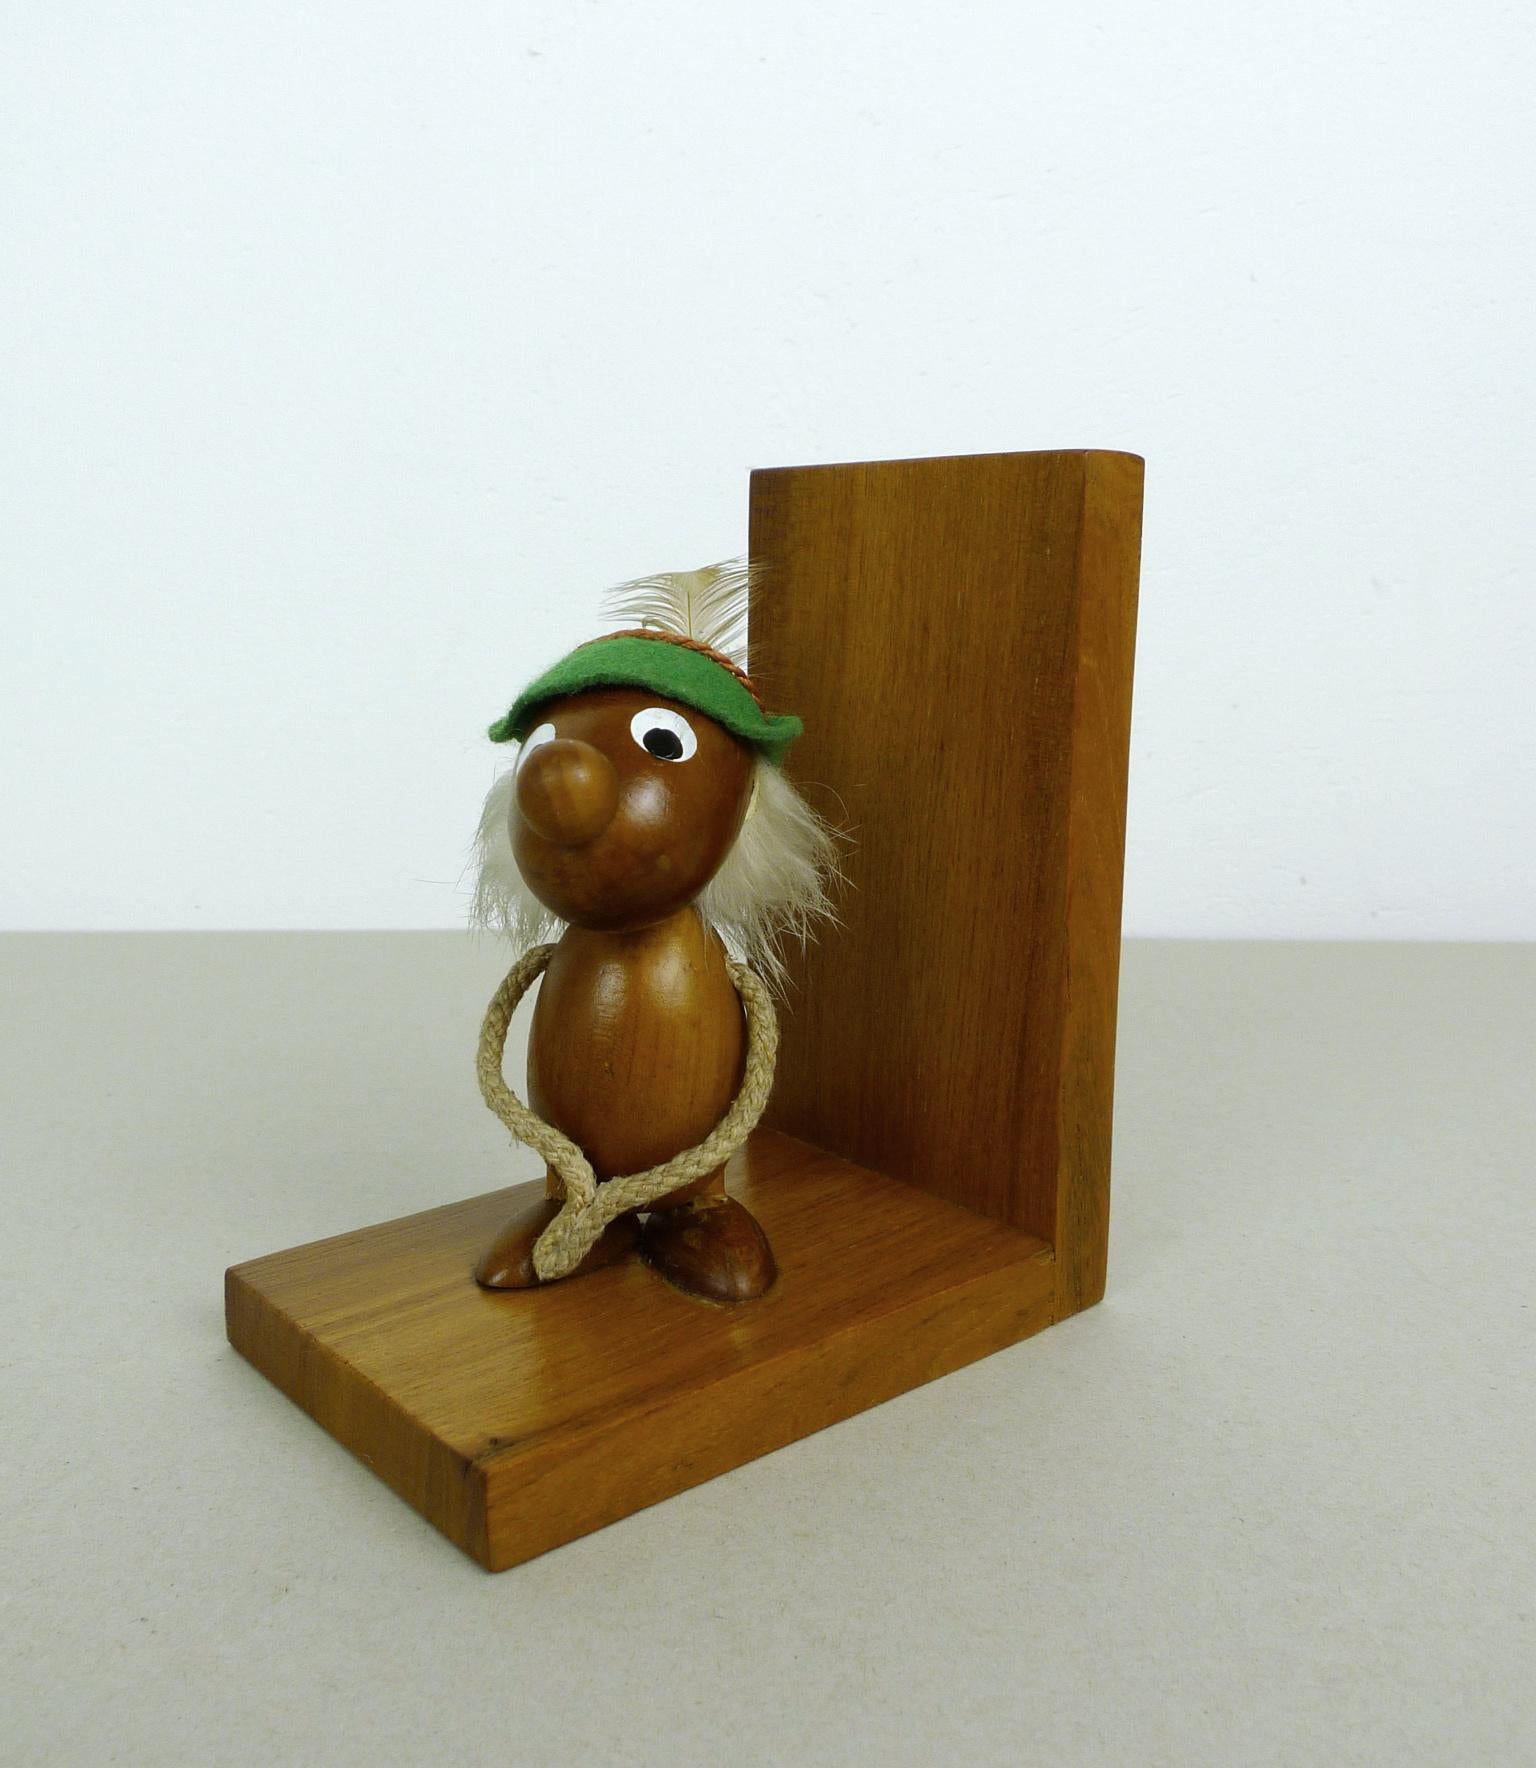 Pair of Italian Bookends with Teak Figurines from Ciola, 1950s For Sale 4